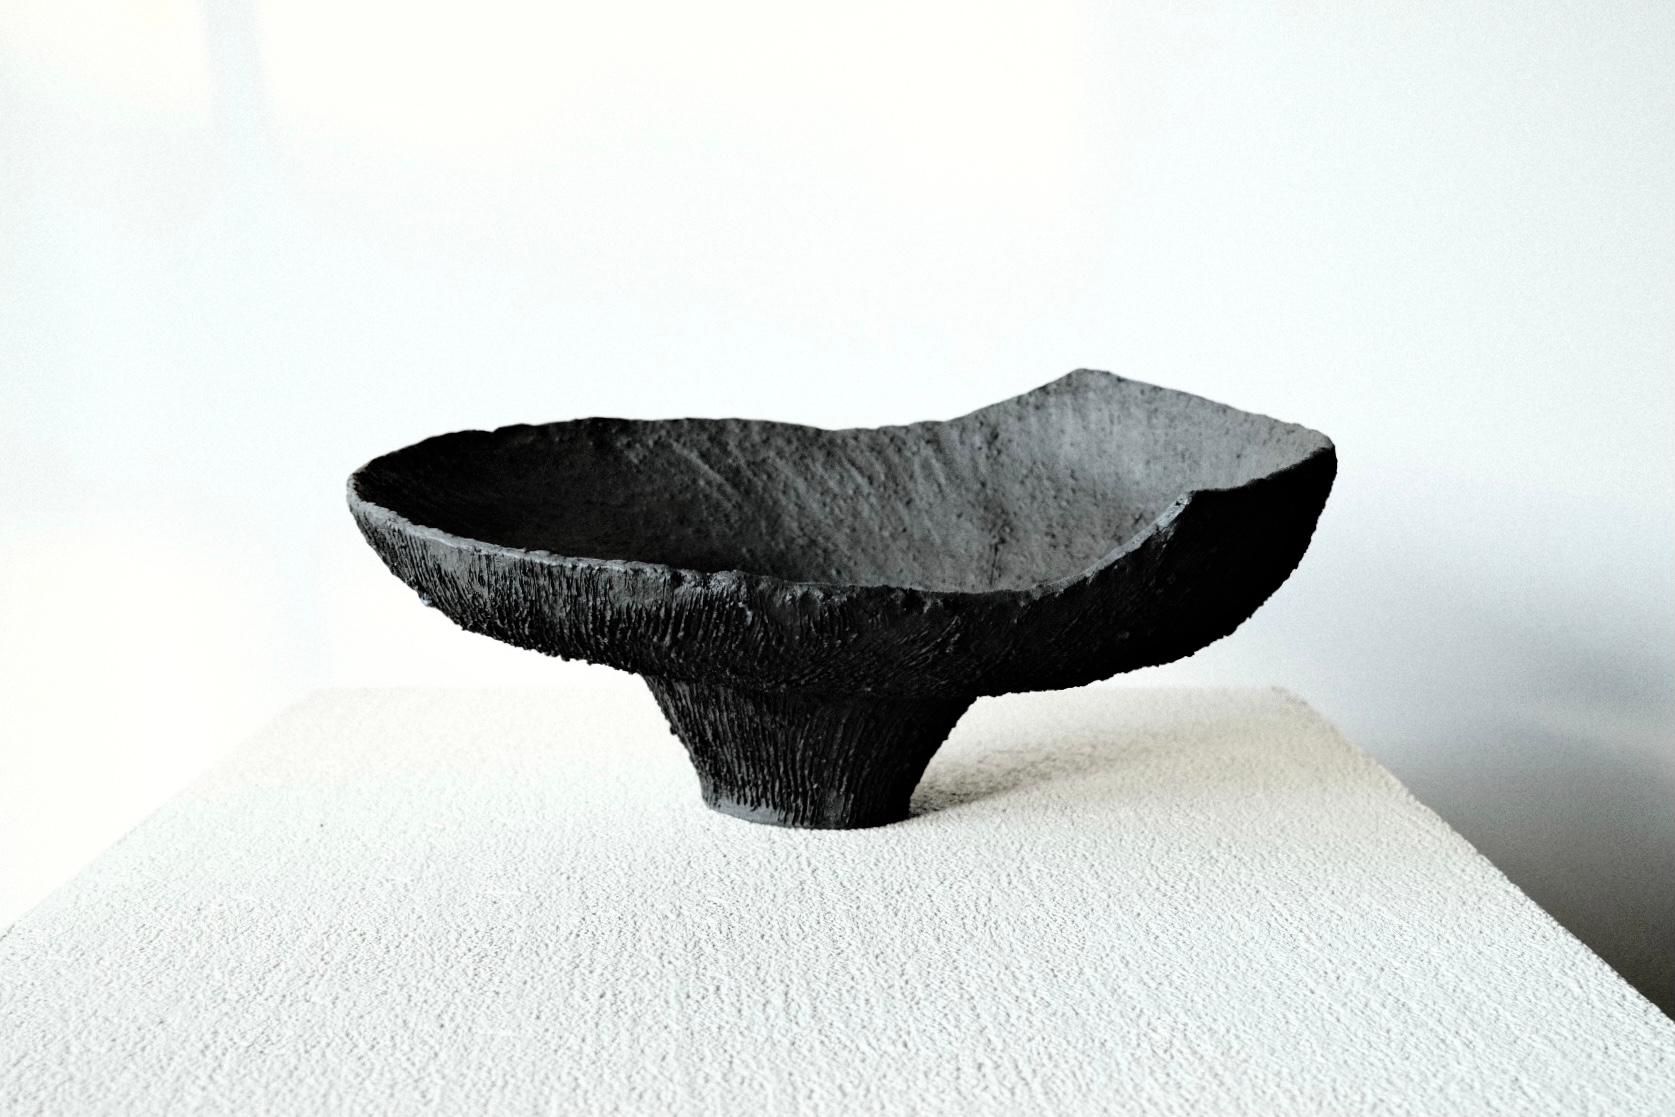 November's Bowl .01 by Cécile Ducommun
Dimensions: D30 x H12 cm
Materials: Stoneware.

Hand modeled stoneware, fired at 1250 degrees. Decorative bowl.

